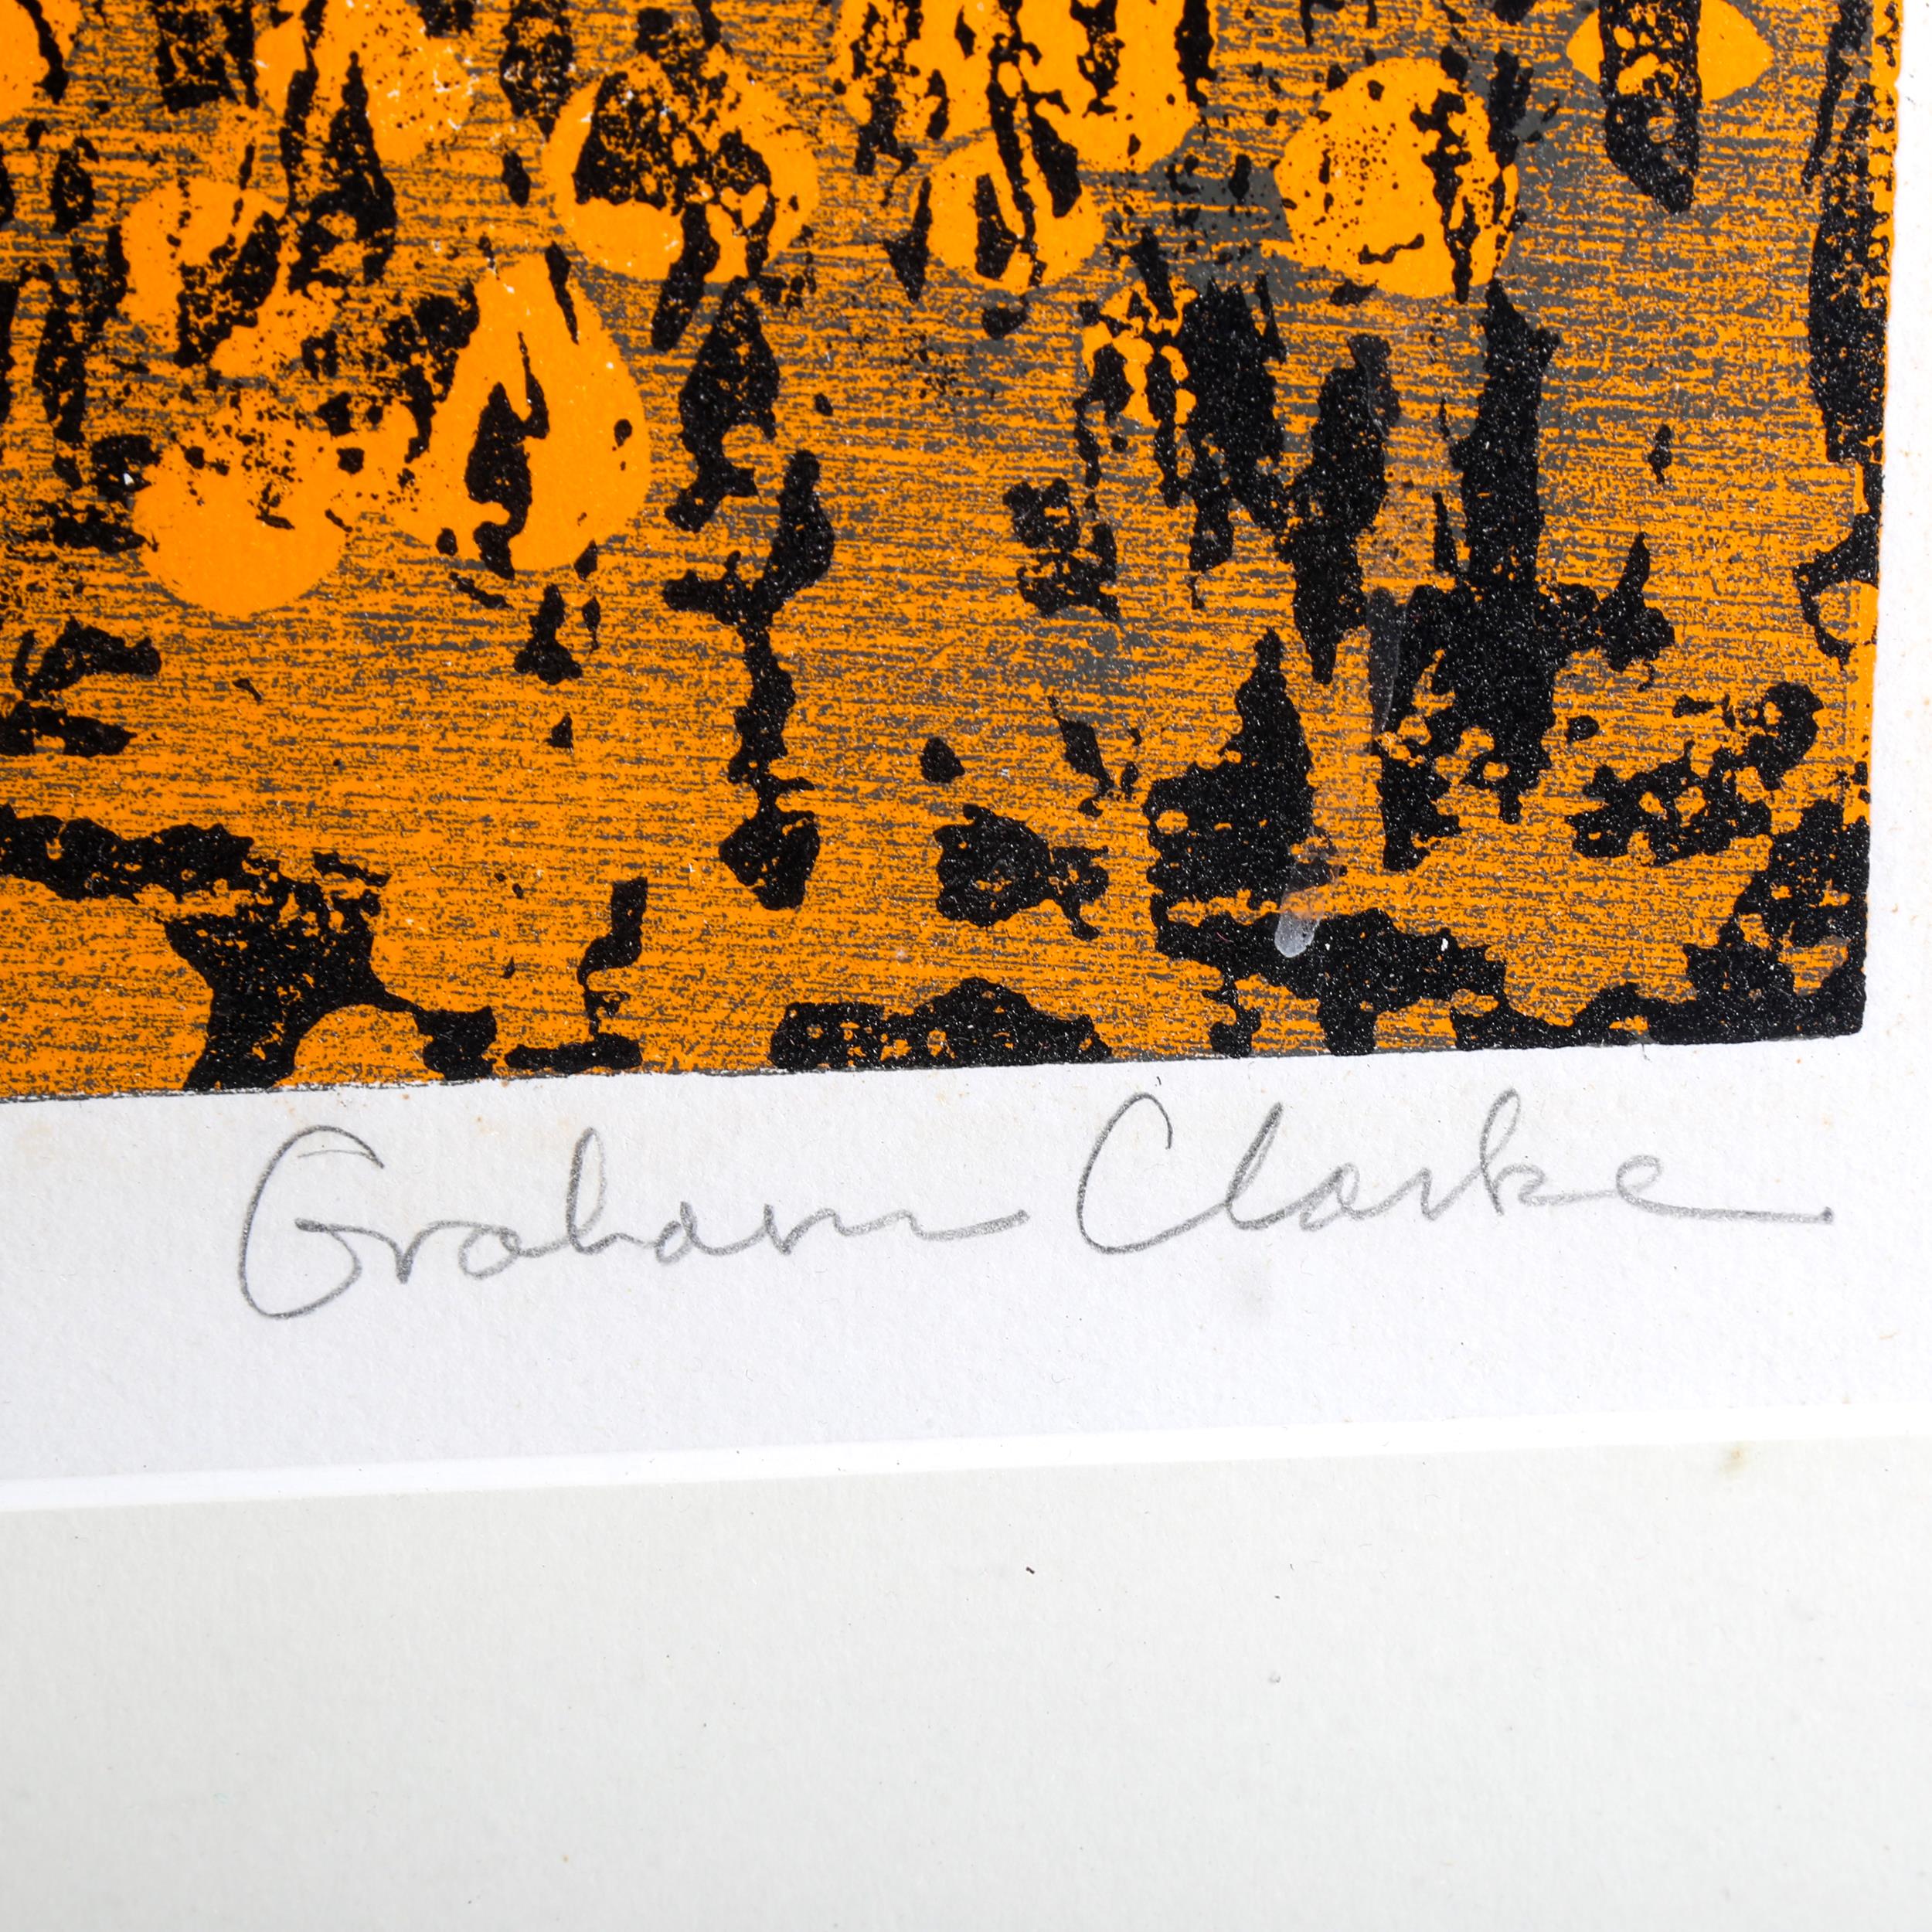 Graham Clarke, colour screen print, St Anthonys, signed in pencil, no. 30/50, image 46cm x 66cm, - Image 3 of 4